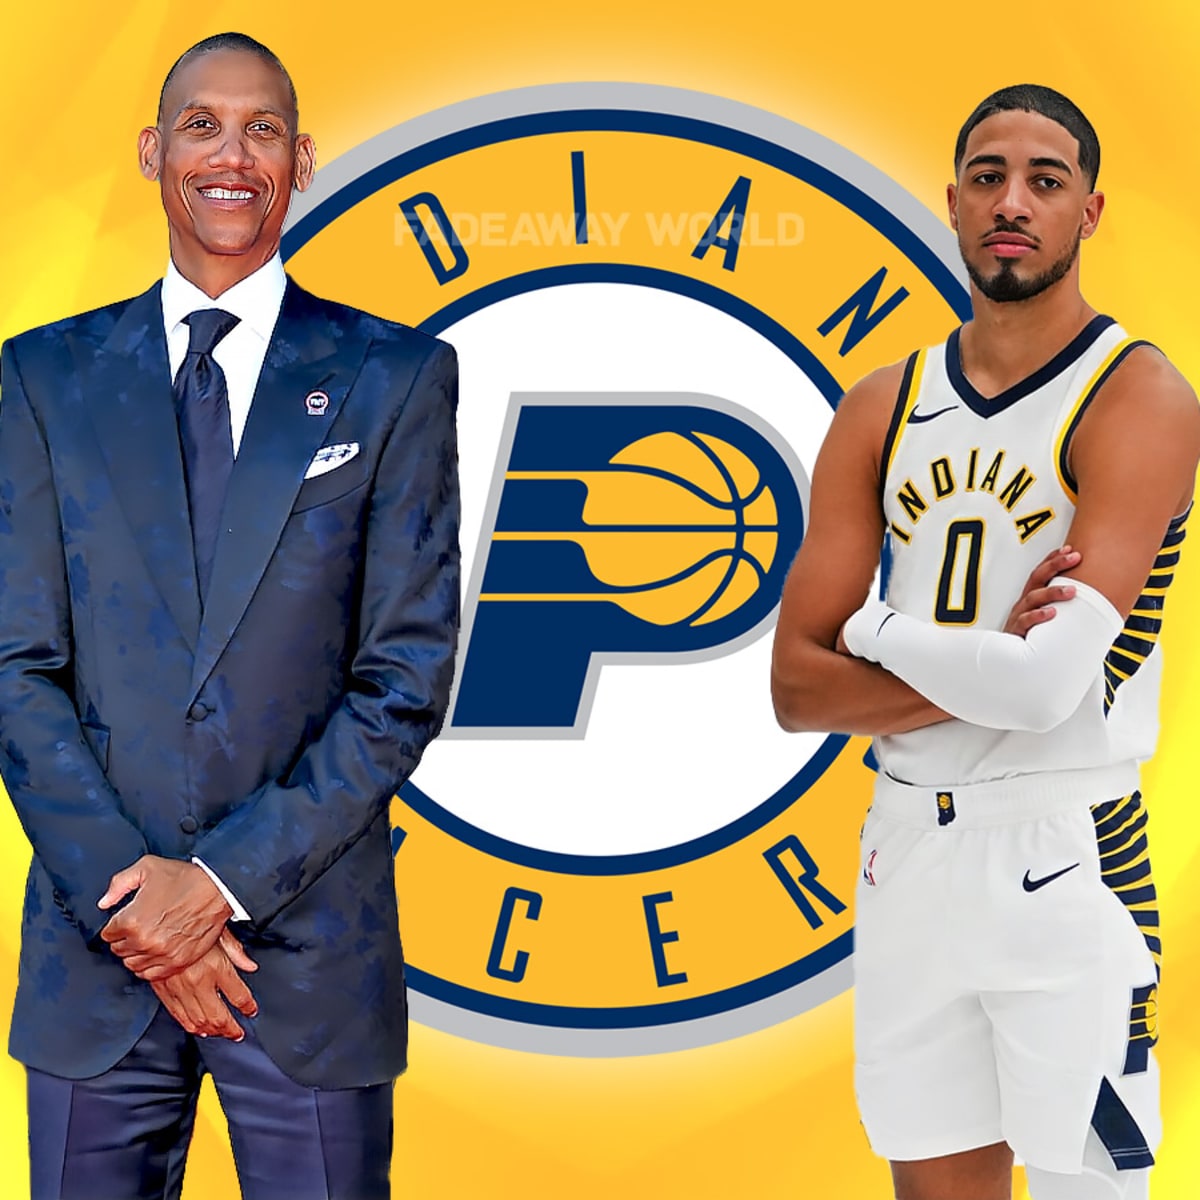 Reggie Miller thrilled to be back in Indianapolis, where he can watch his  beloved Indiana Pacers and Tyrese Haliburton - Sports Illustrated Indiana  Pacers news, analysis and more